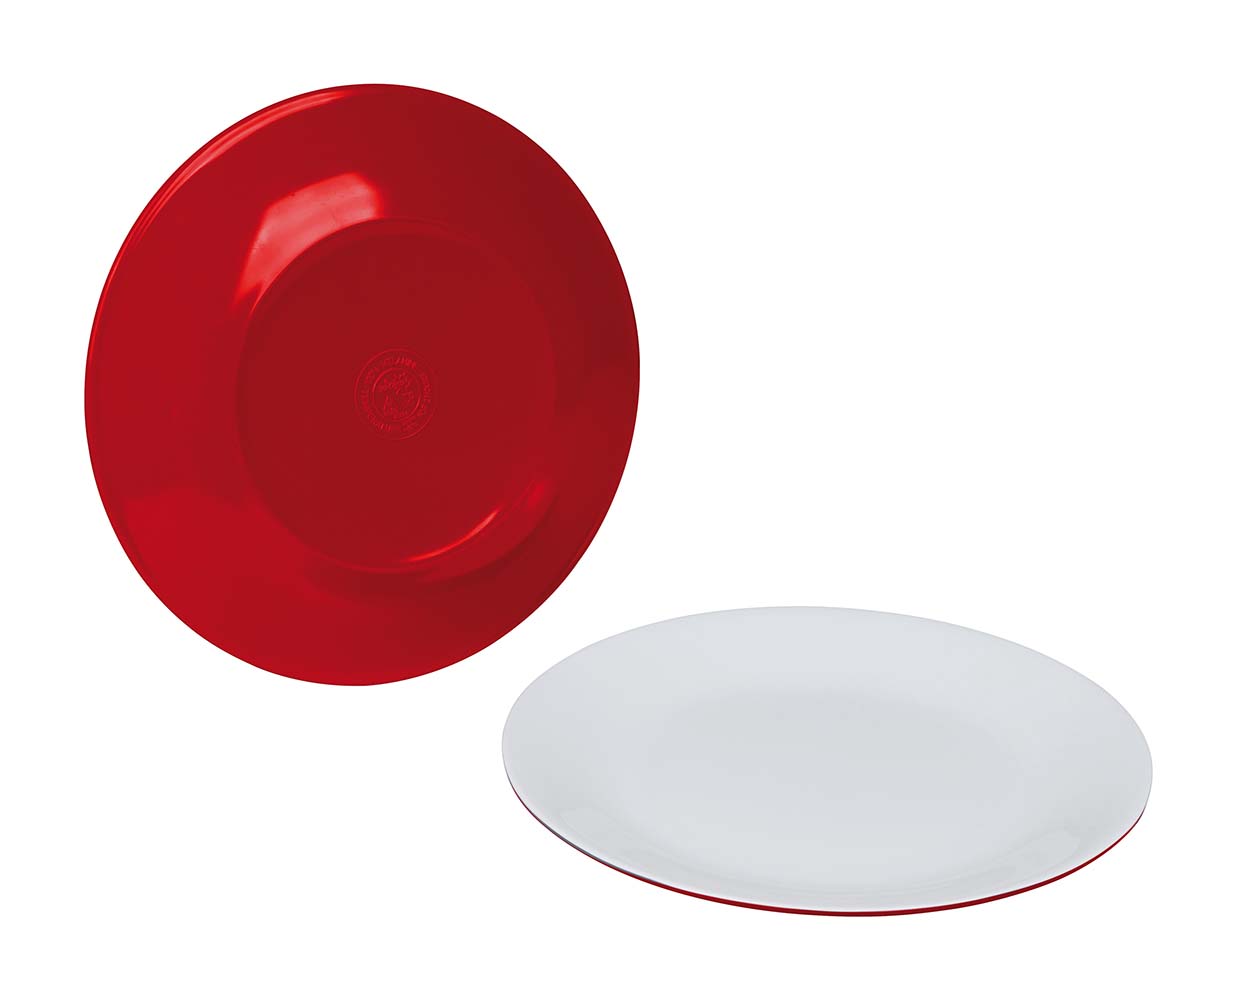 6181220 A deep 100% melamine breakfast plate. This high-quality melamine breakfast plate is virtually unbreakable and very light weight. The plate is also scratch resistant and dishwasher safe.